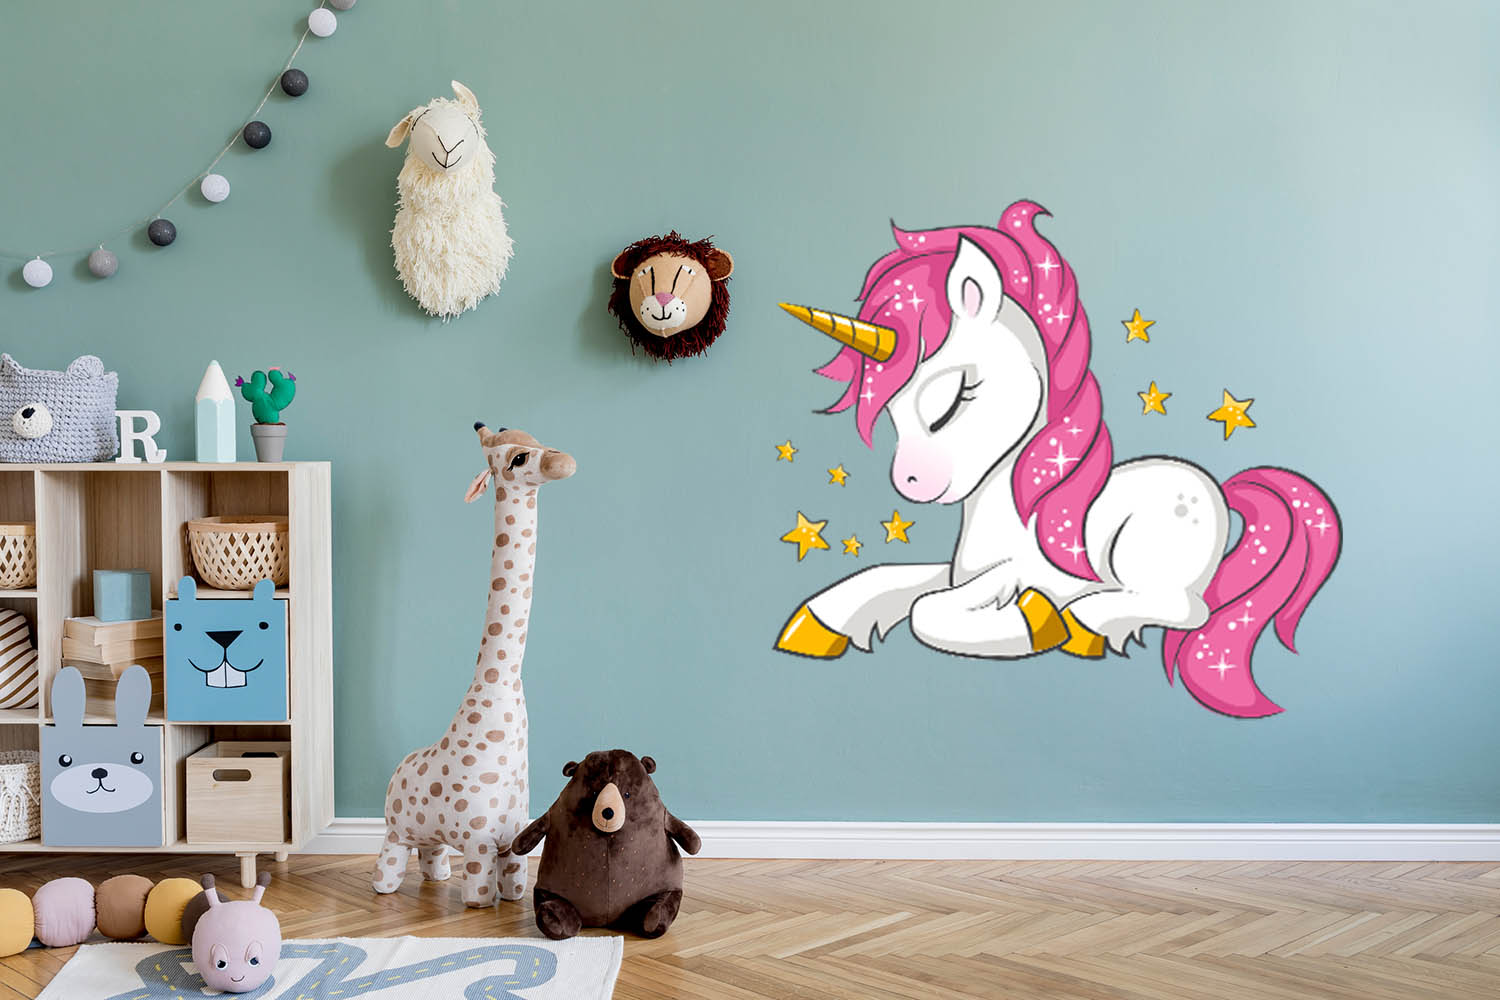 Sleeping Pink Maned UniCorn with 8 separate stars, Wall Decal Sticker, Removable with NO wall Damage!